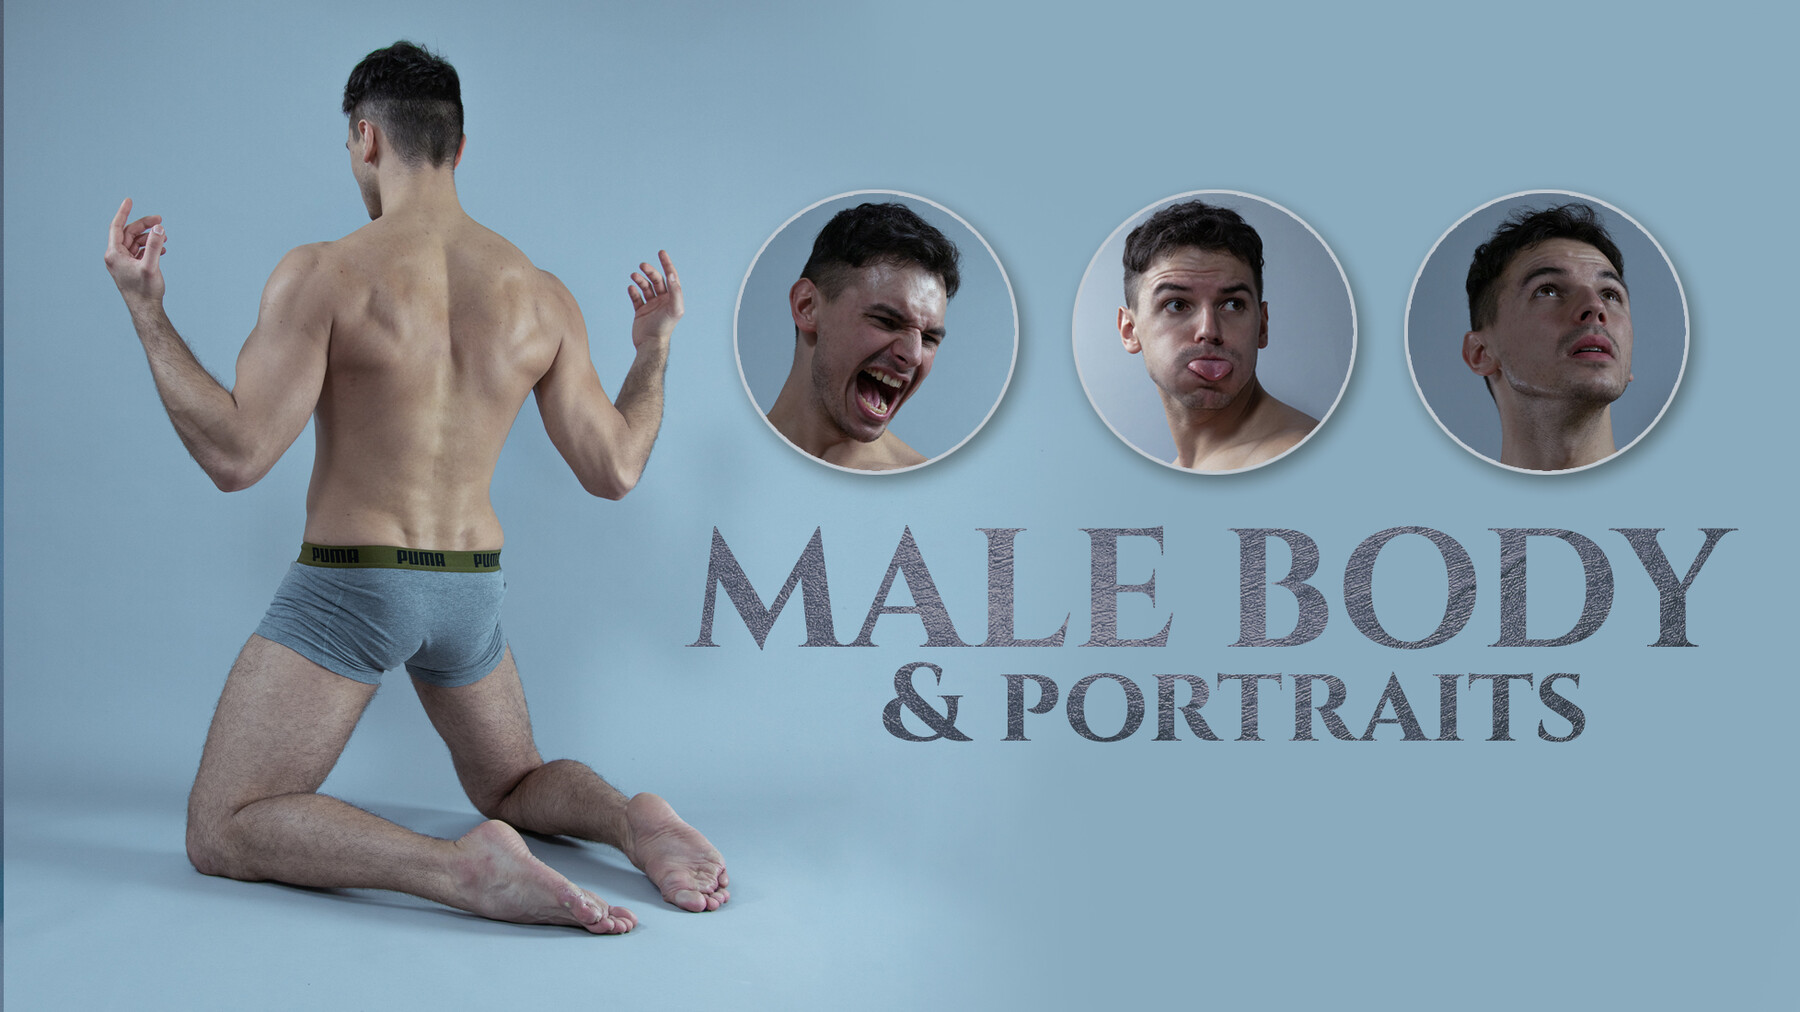 ArtStation - Male and Female Body Photo Reference Pack For Artists